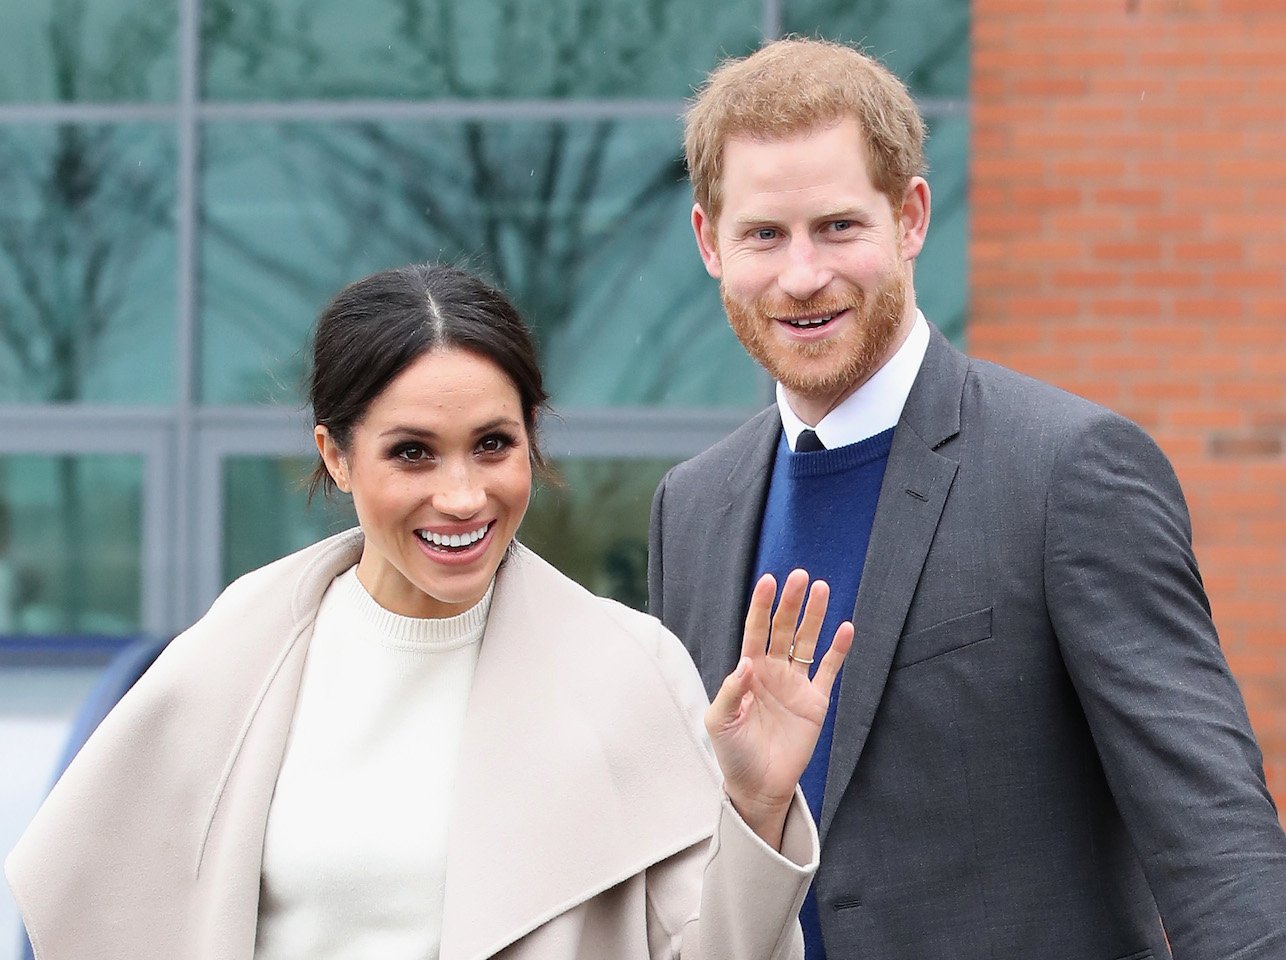 Meghan Markel royal title possibilities-Meghan and Prince Harry stand smiling and waving at the camera